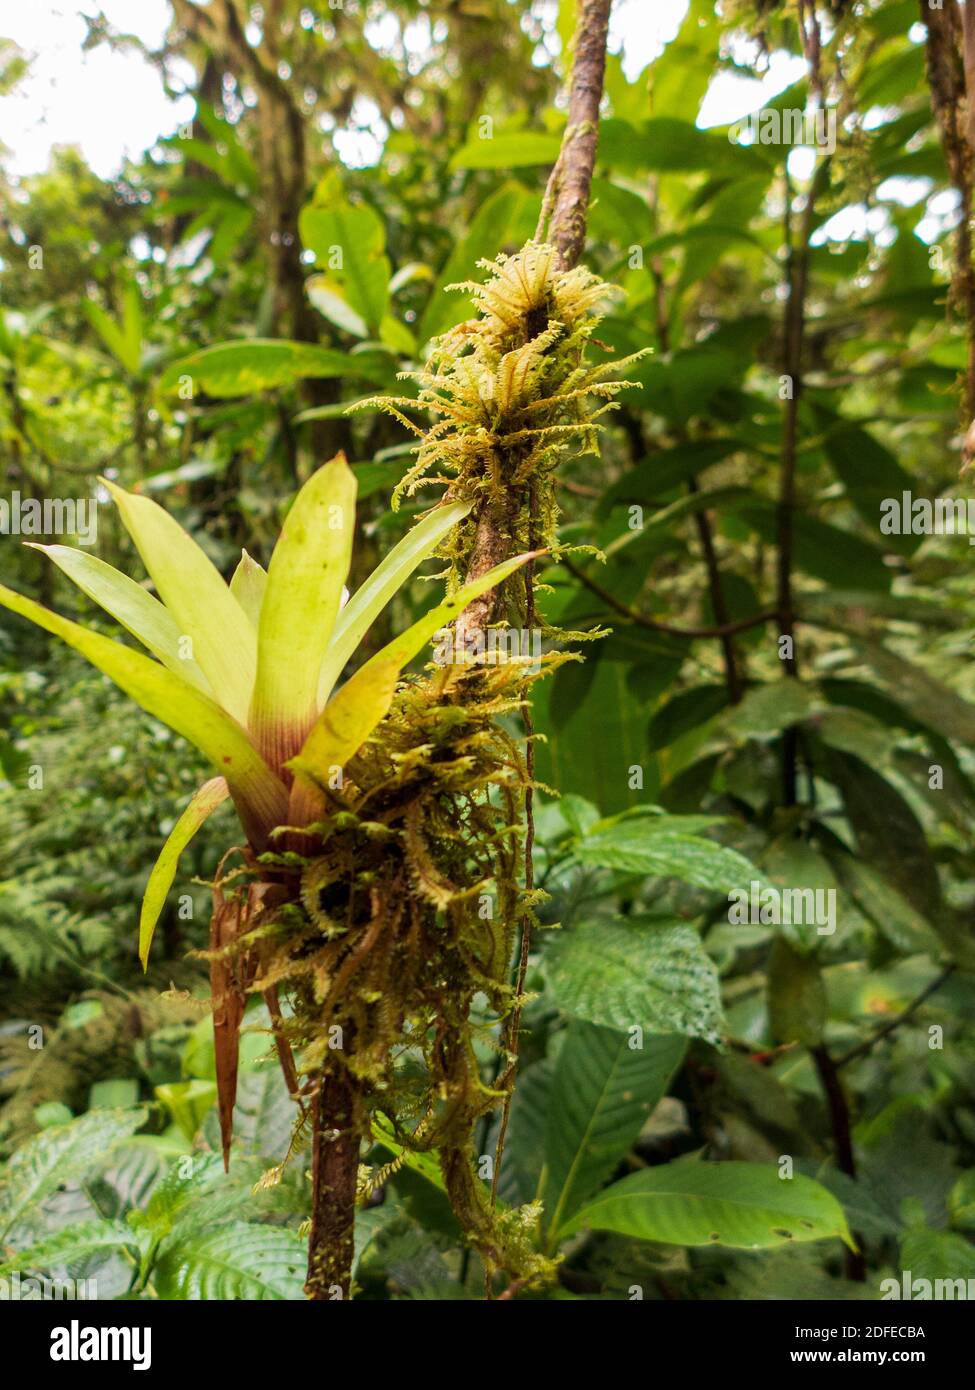 Hike through the rainforest of Costa Rica. Bromeliads, ferns, selaginella and other epiphytes grow on the trees. So many different green tones. Stock Photo